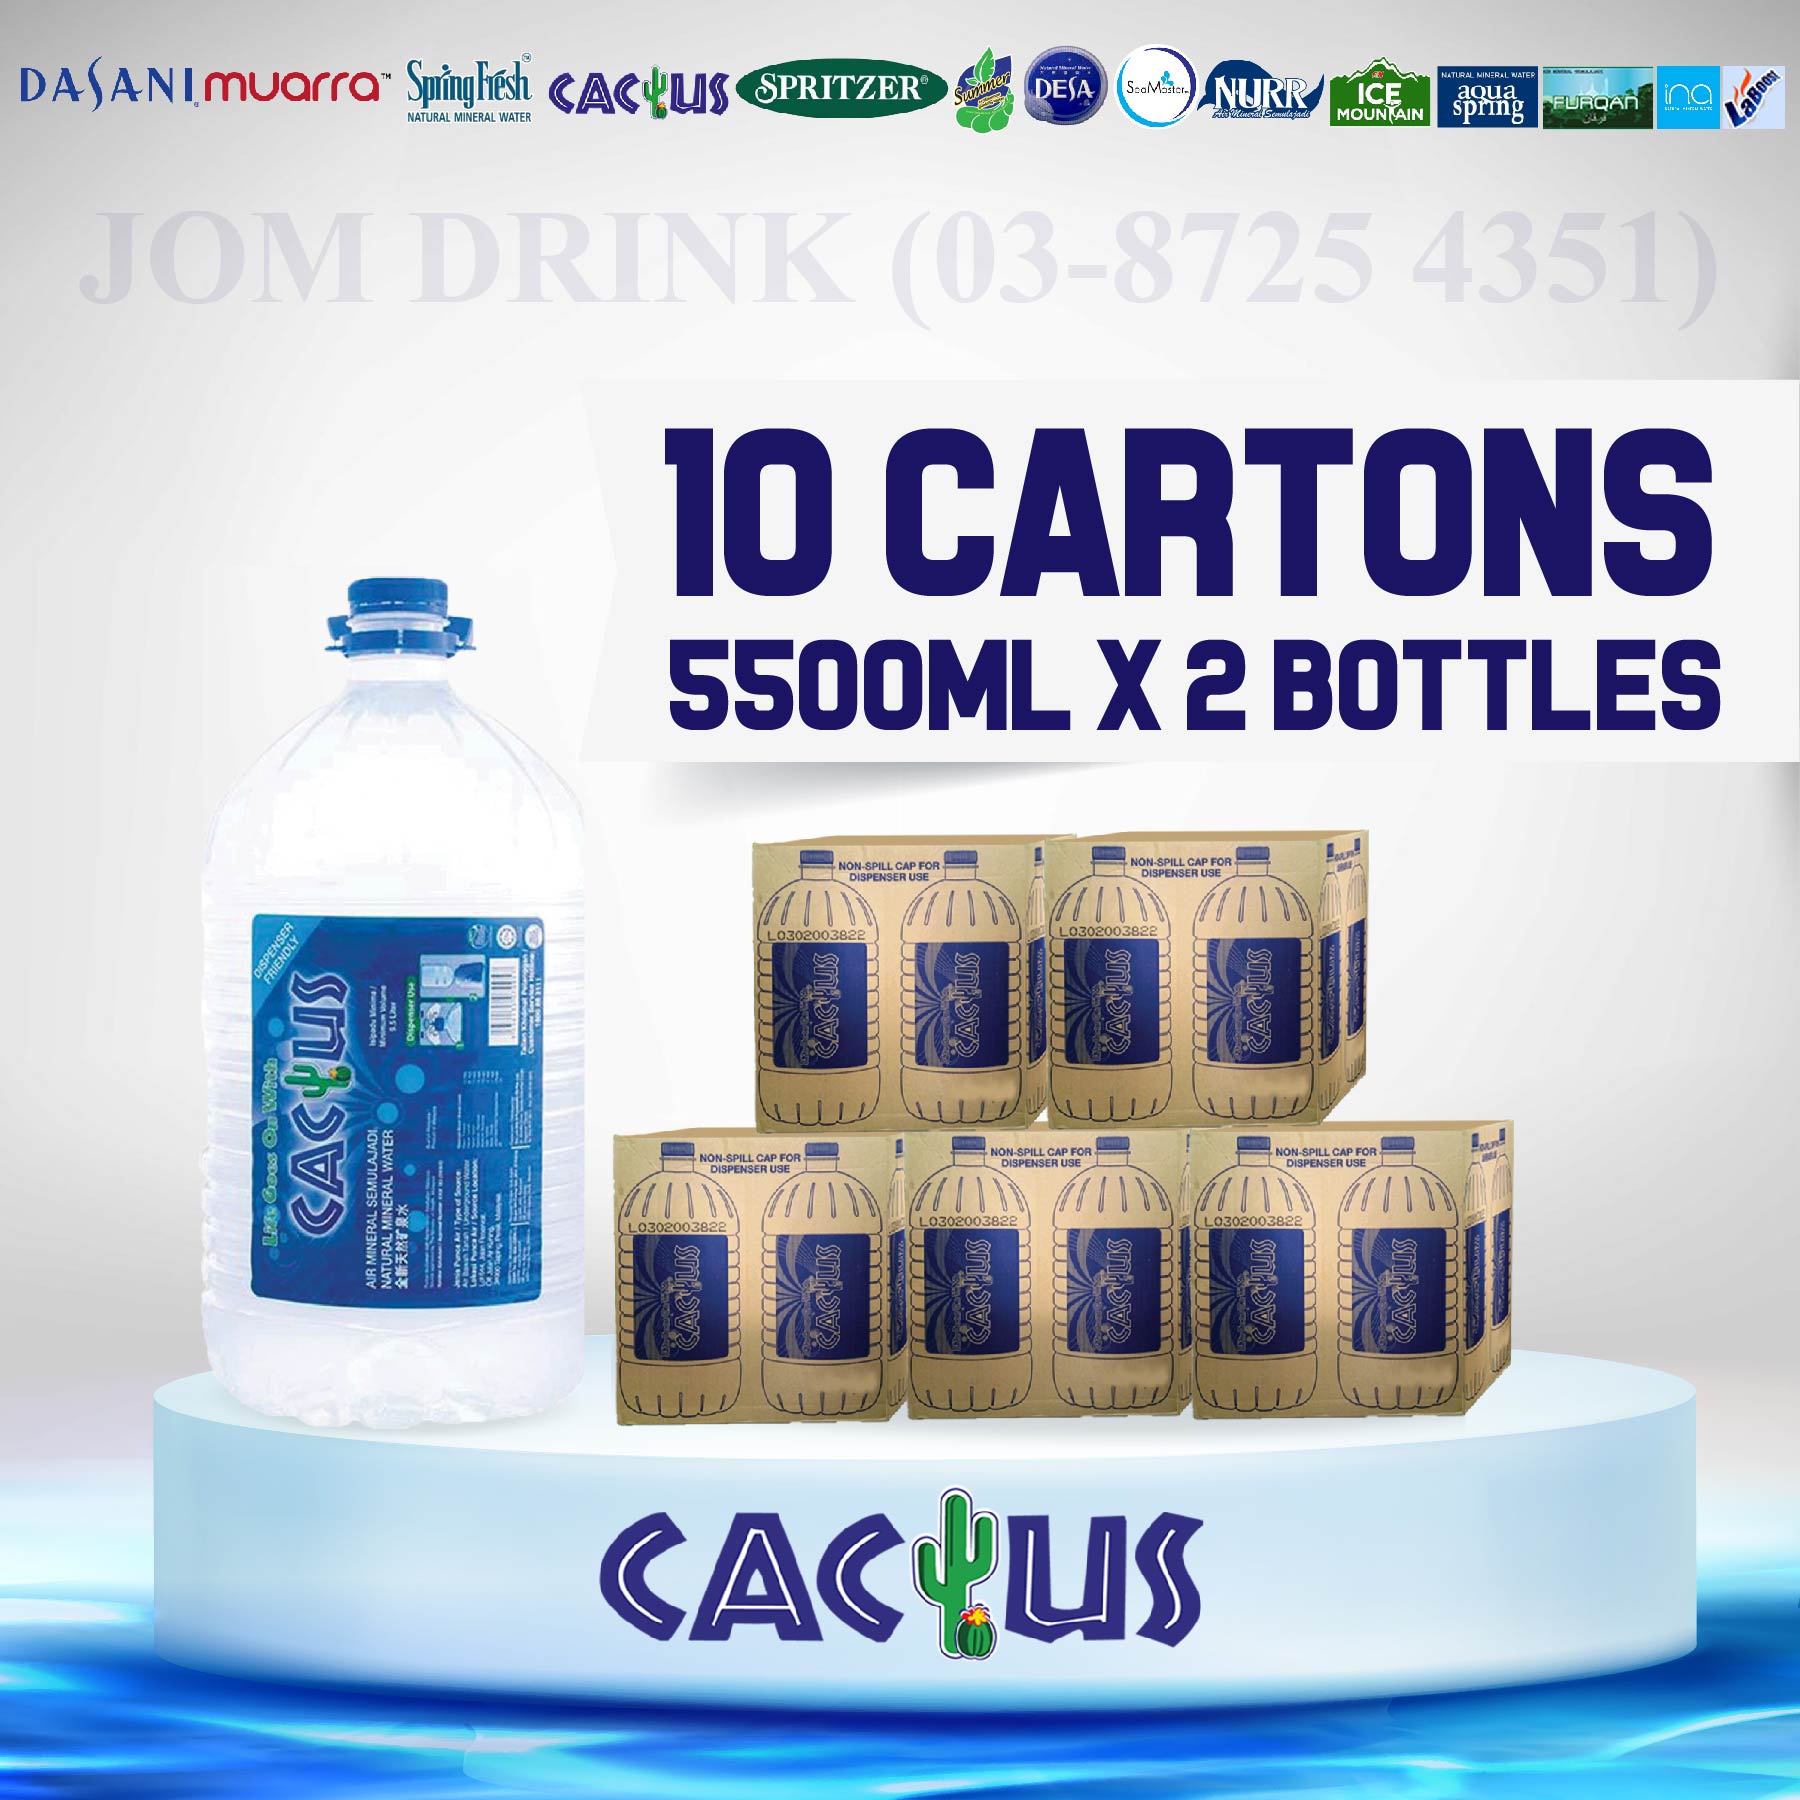 PACKAGES OF 10 BOXES : CACTUS MINERAL WATER 5500ML